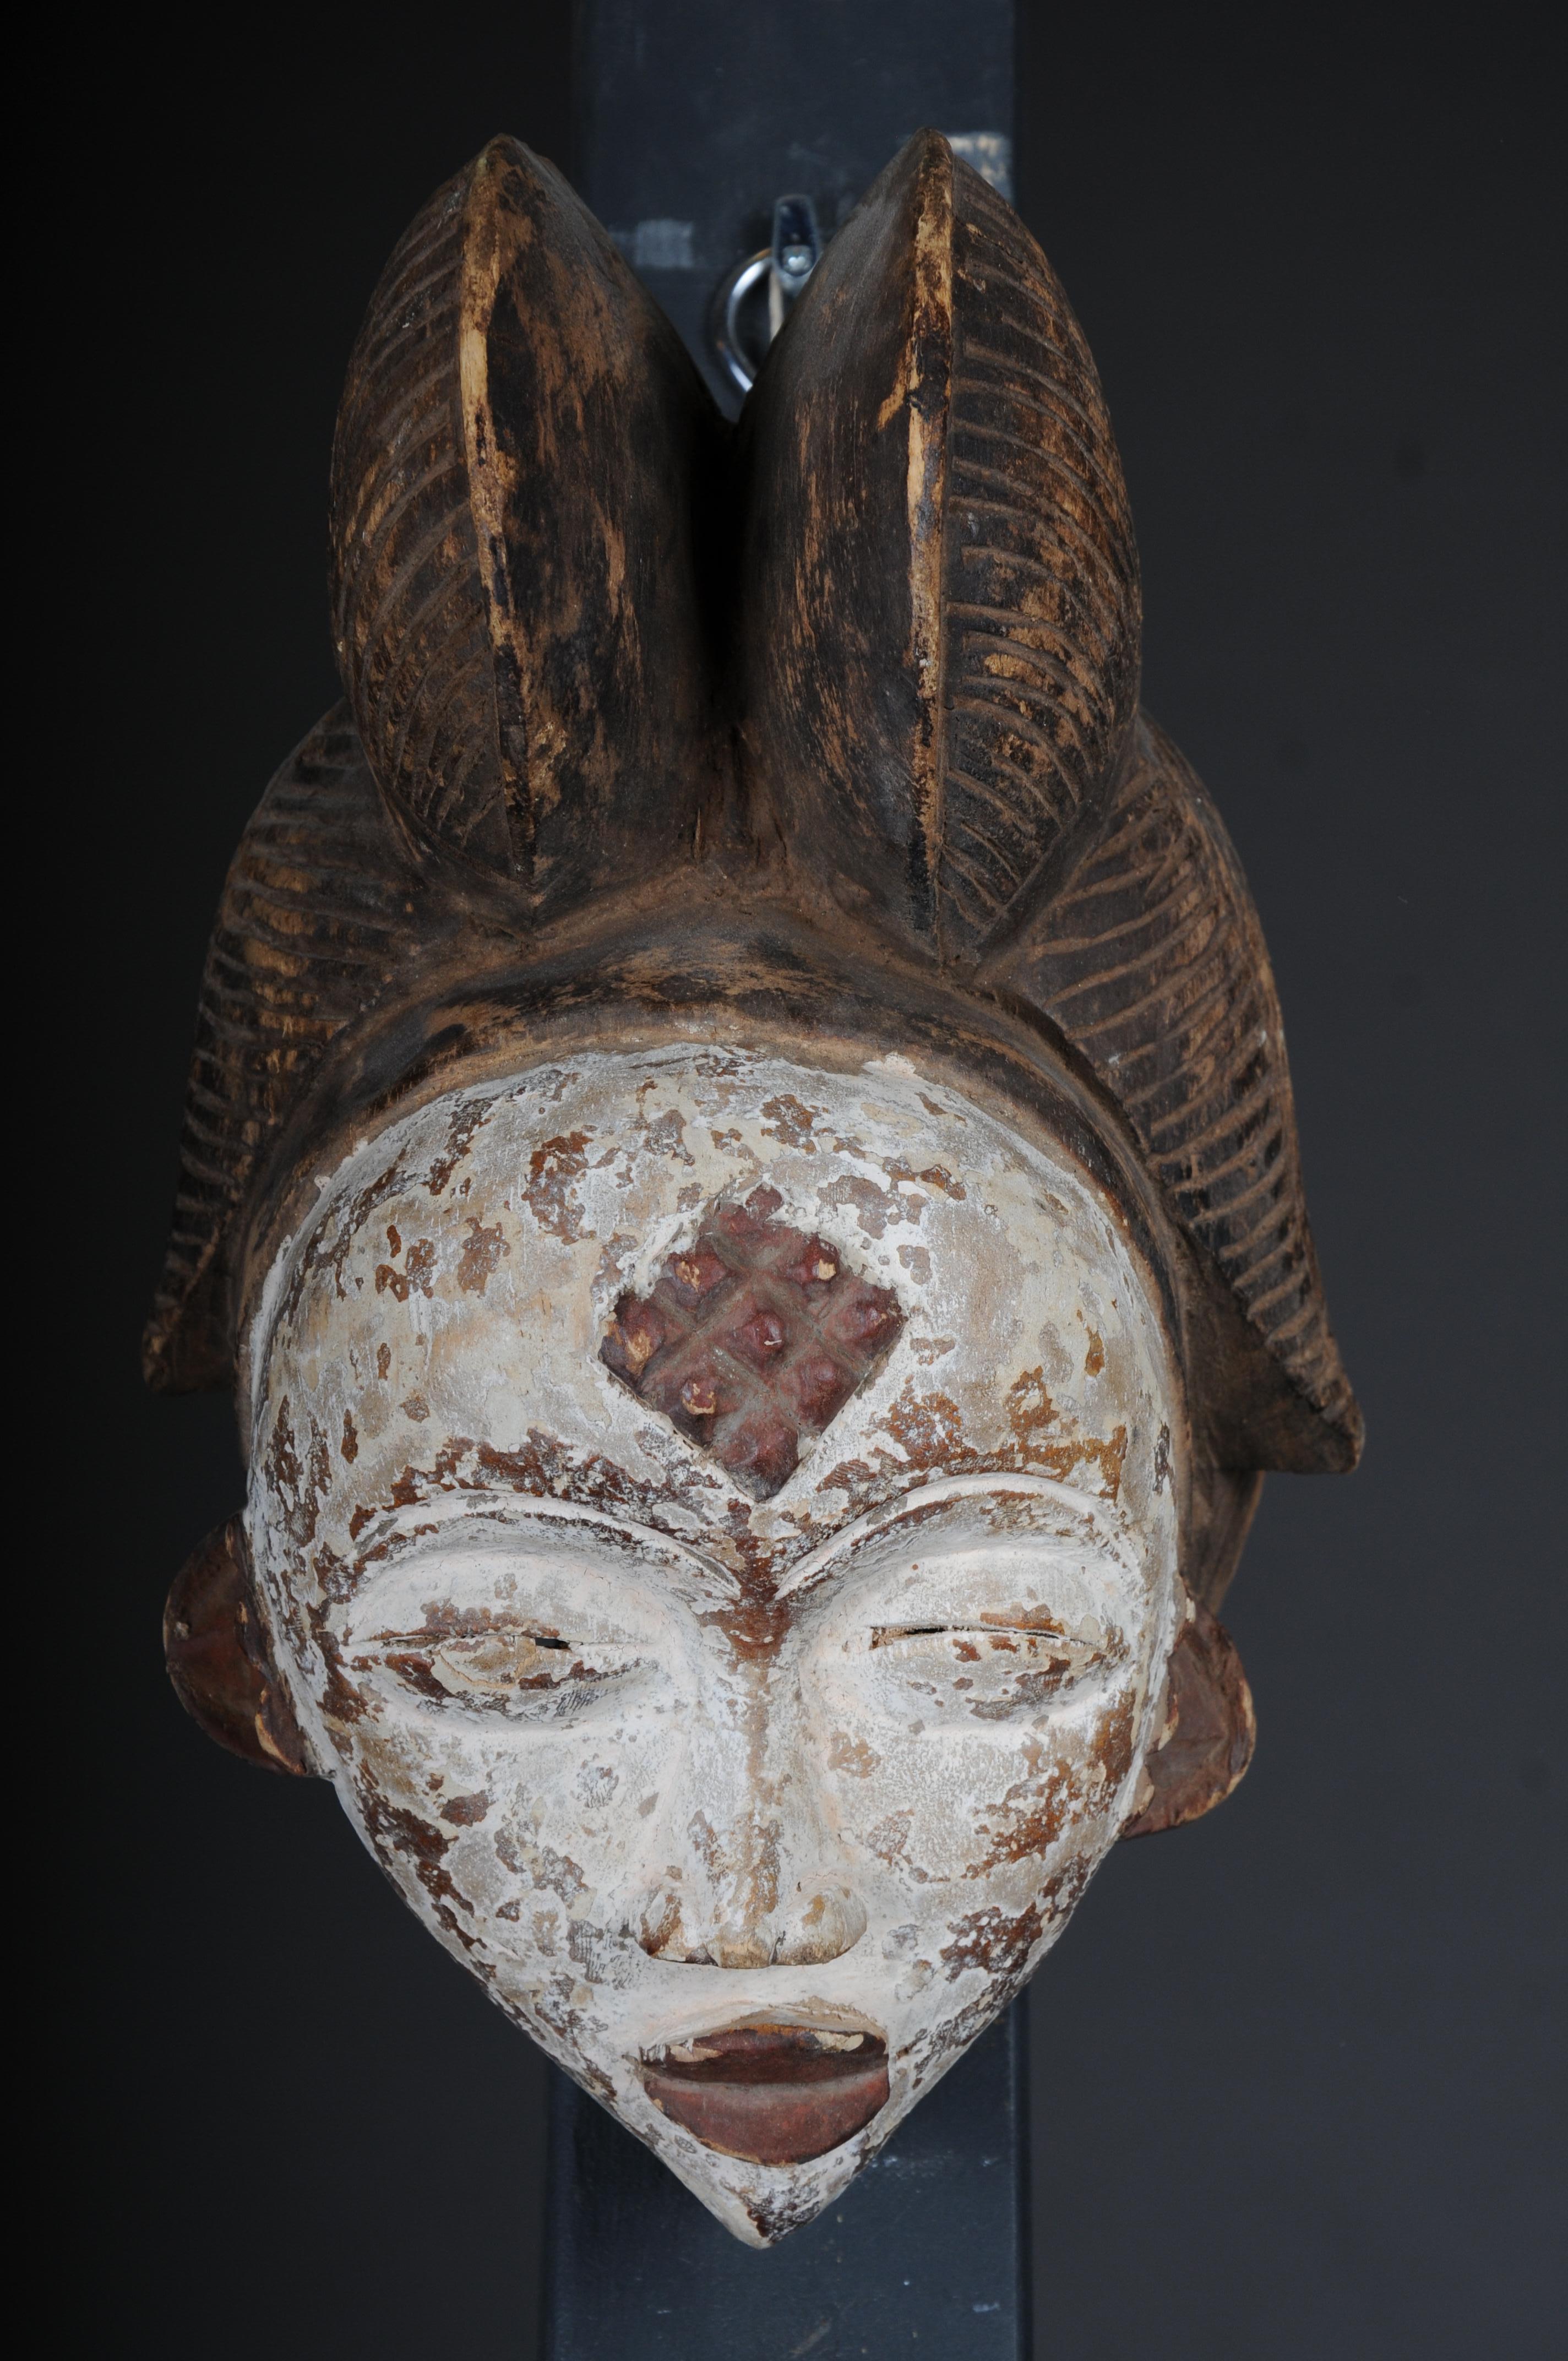 20th Century Antique Carved Wooden Face Mask, African Folk Art. Hangable.Decorative

Solid wood, hand-carved, Africa probably 20th century

The face mask has a device for hanging.

Very decorative timeless work of art.

  Comes from a Berlin private